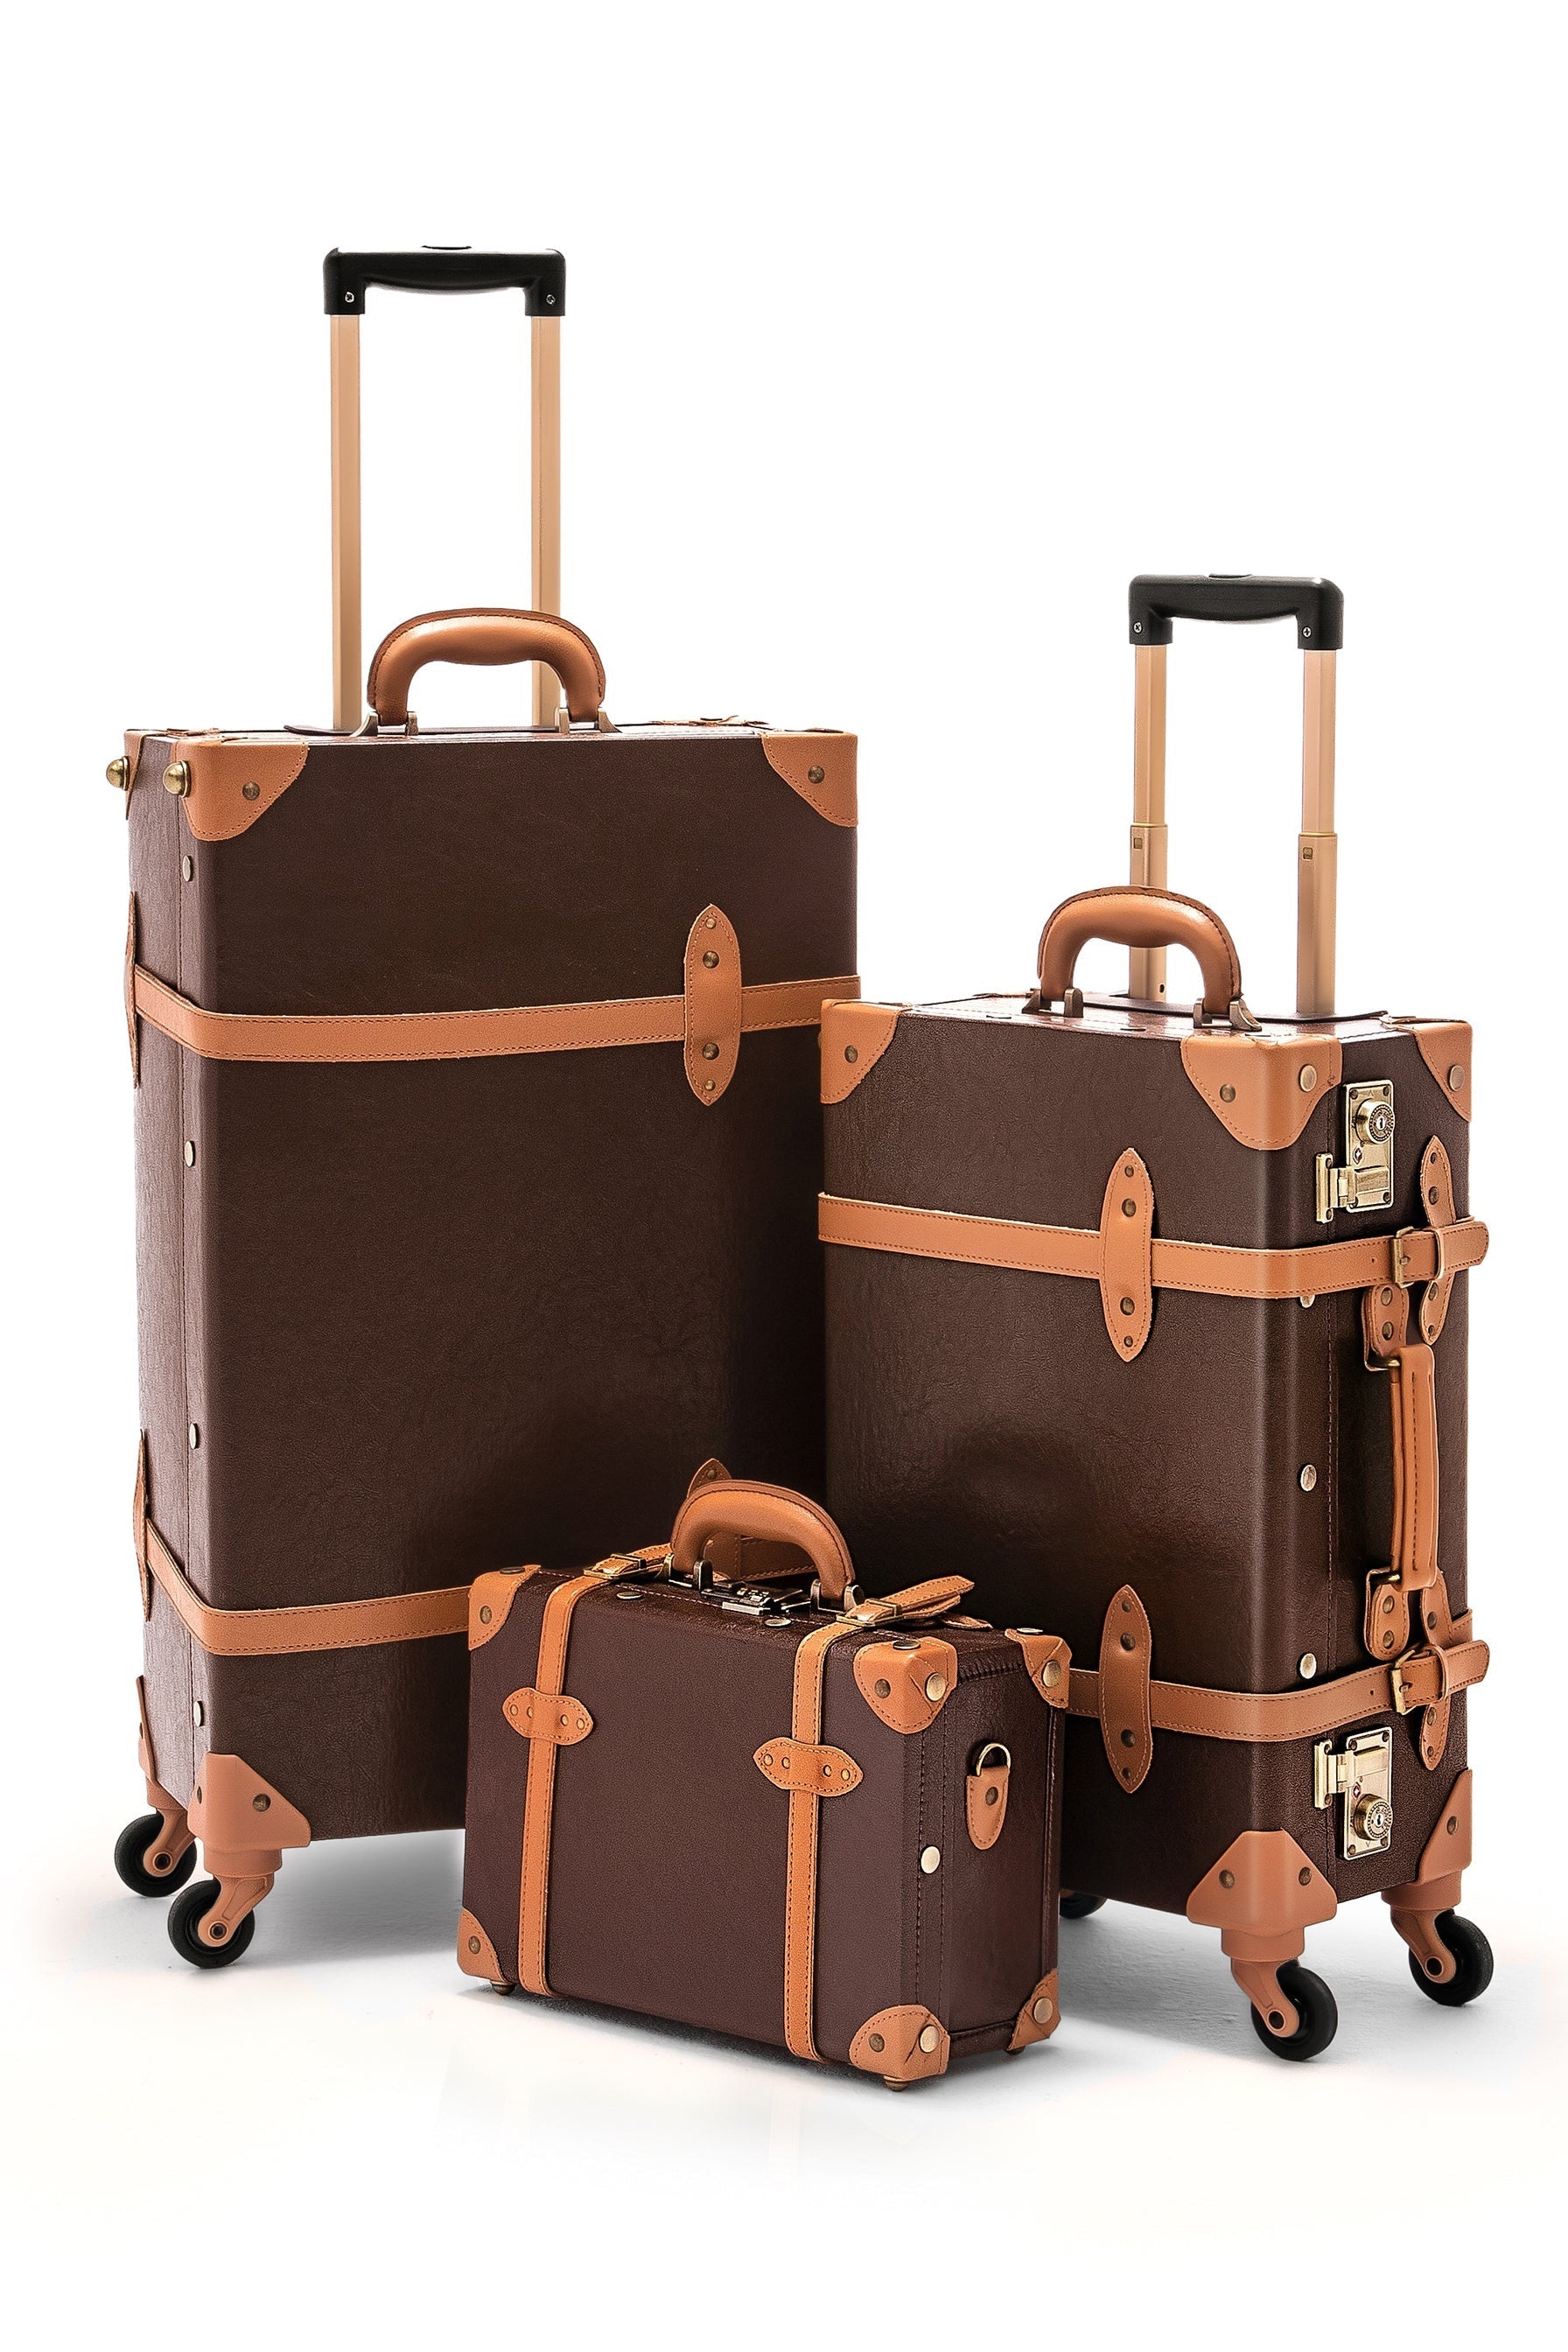 (United States) Minimalism 3 Pieces Luggage Set - Cocoa Brown's